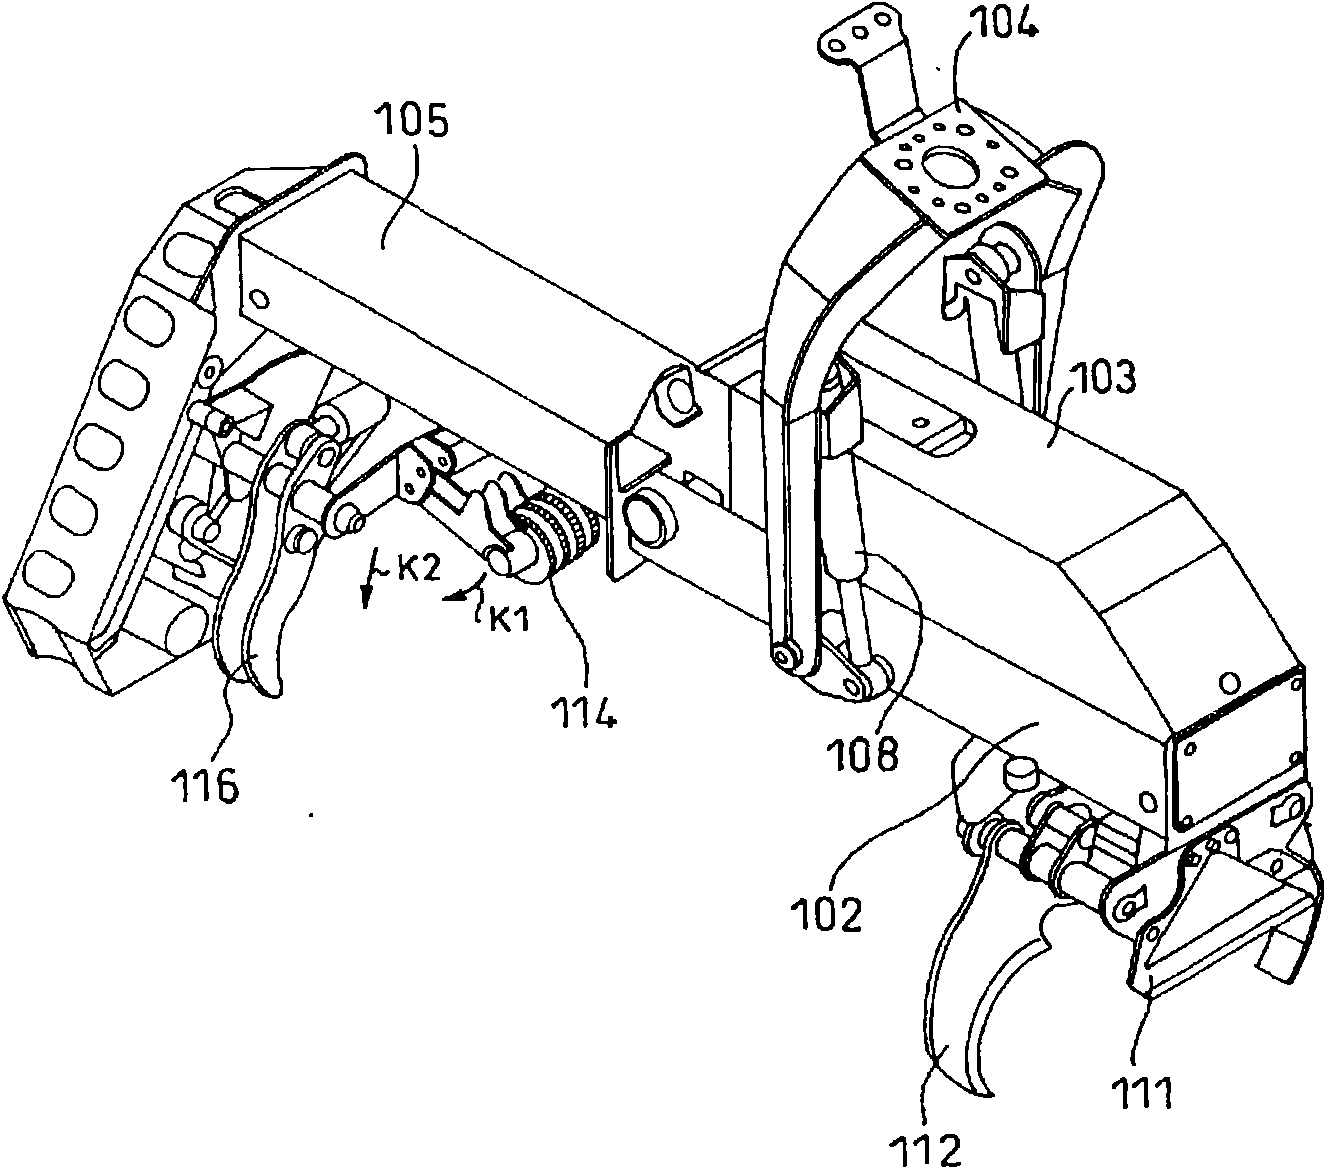 Harvester machine for wood and felling/wood making method